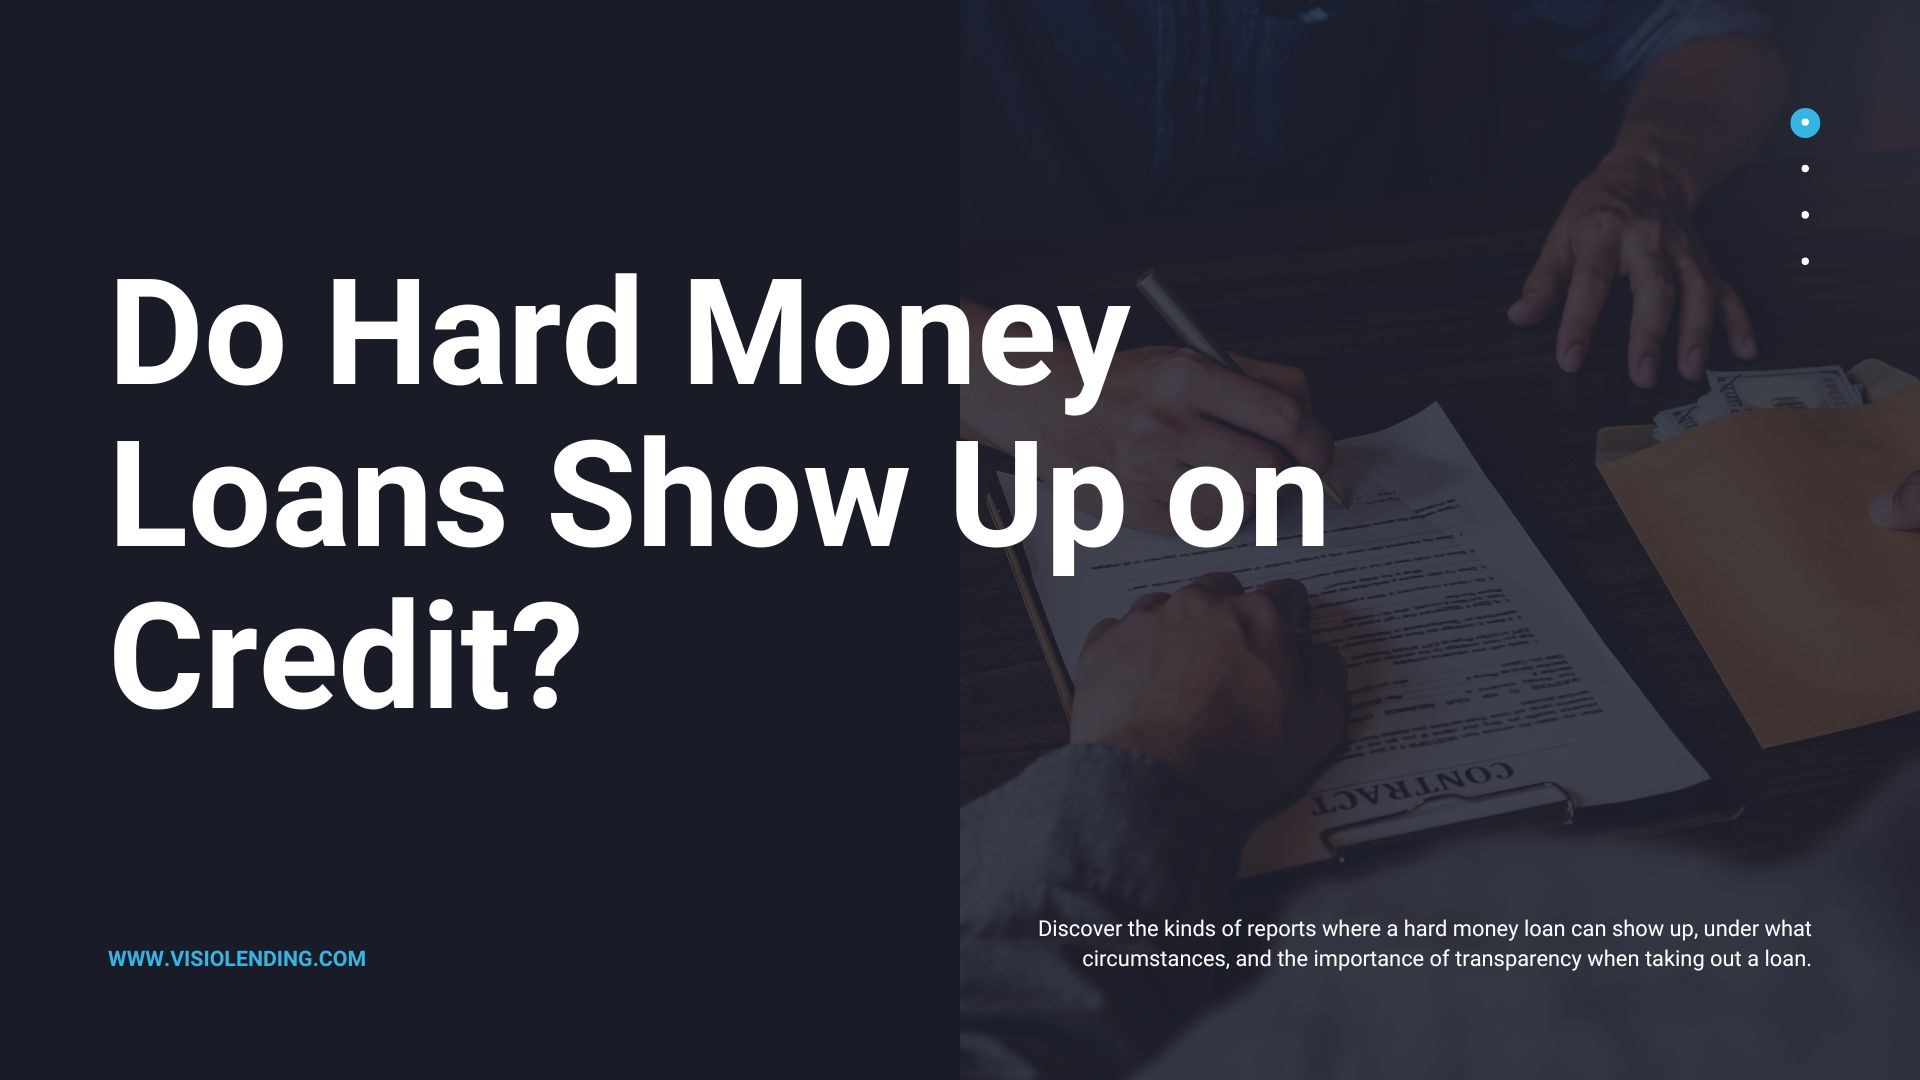 do hard money loans show up on credit reports?